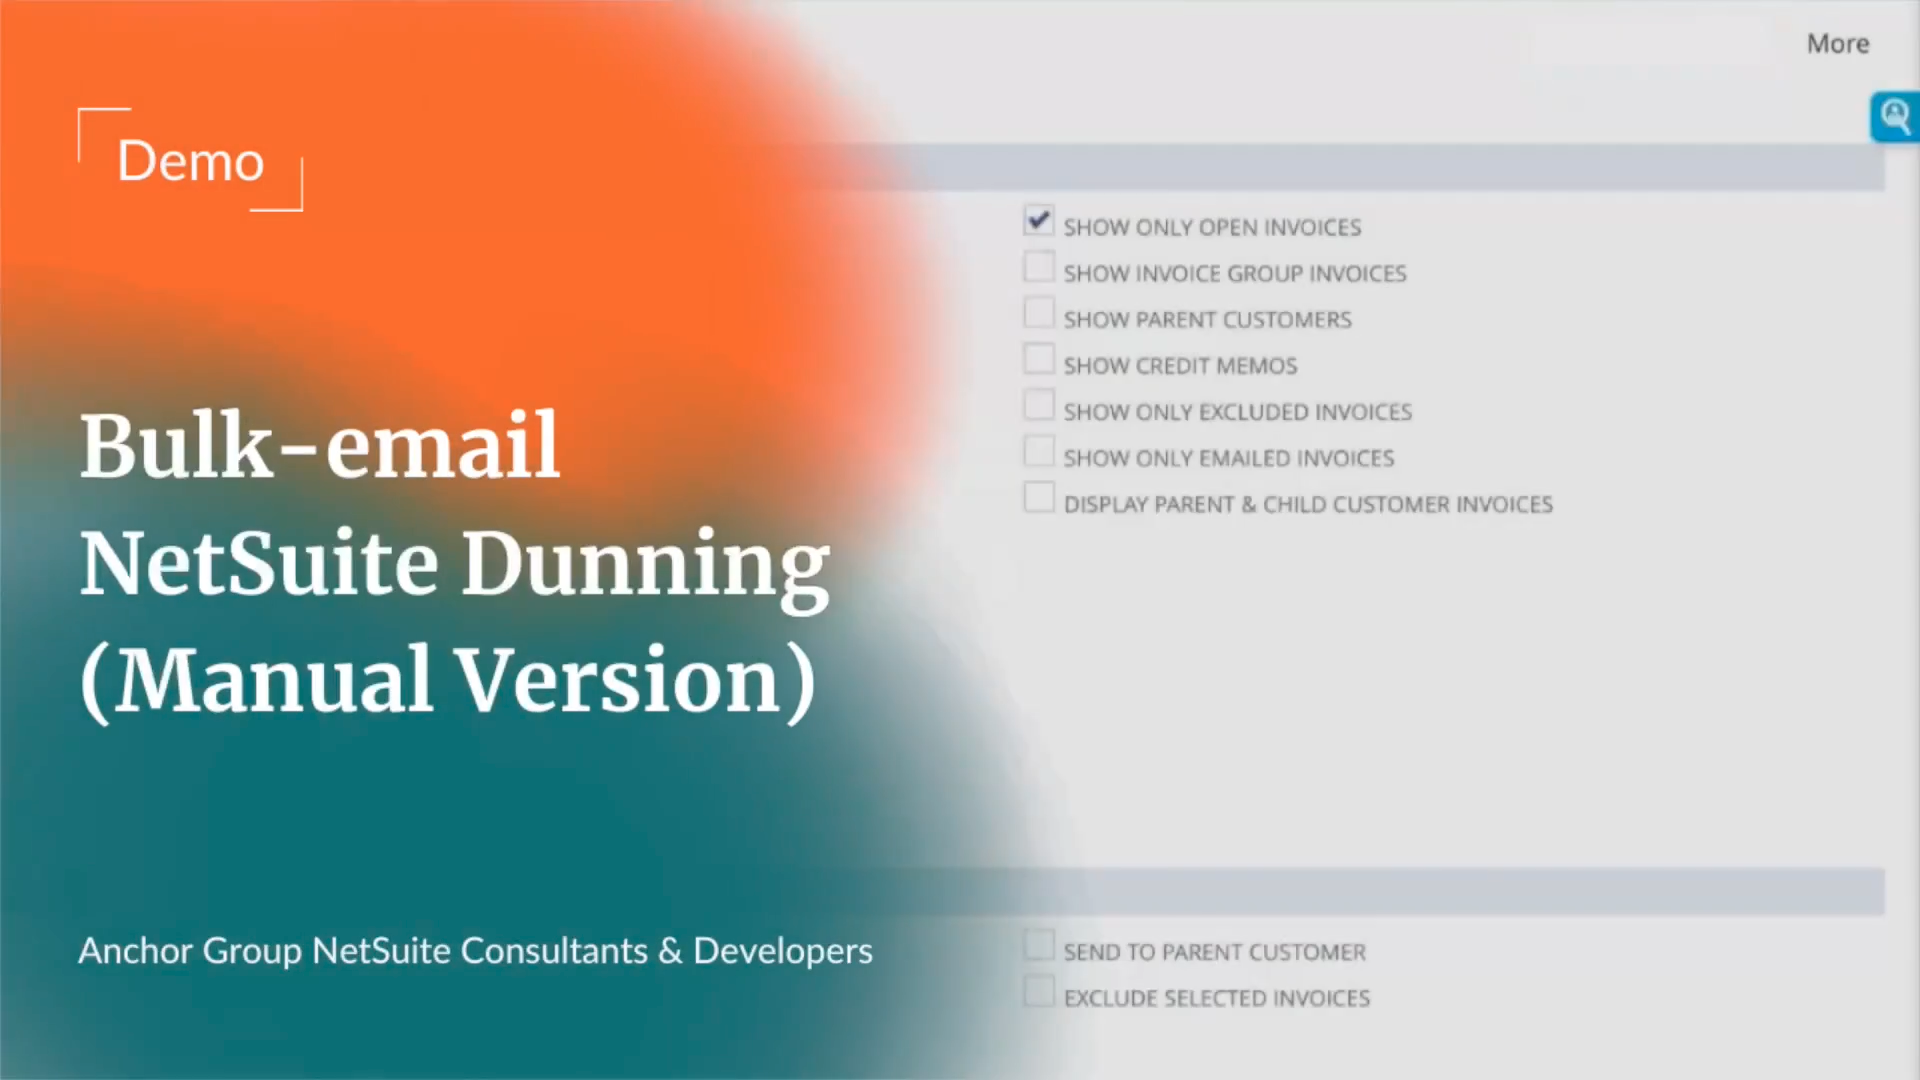 Intro to Bulk-email NetSuite Dunning | Manual Version